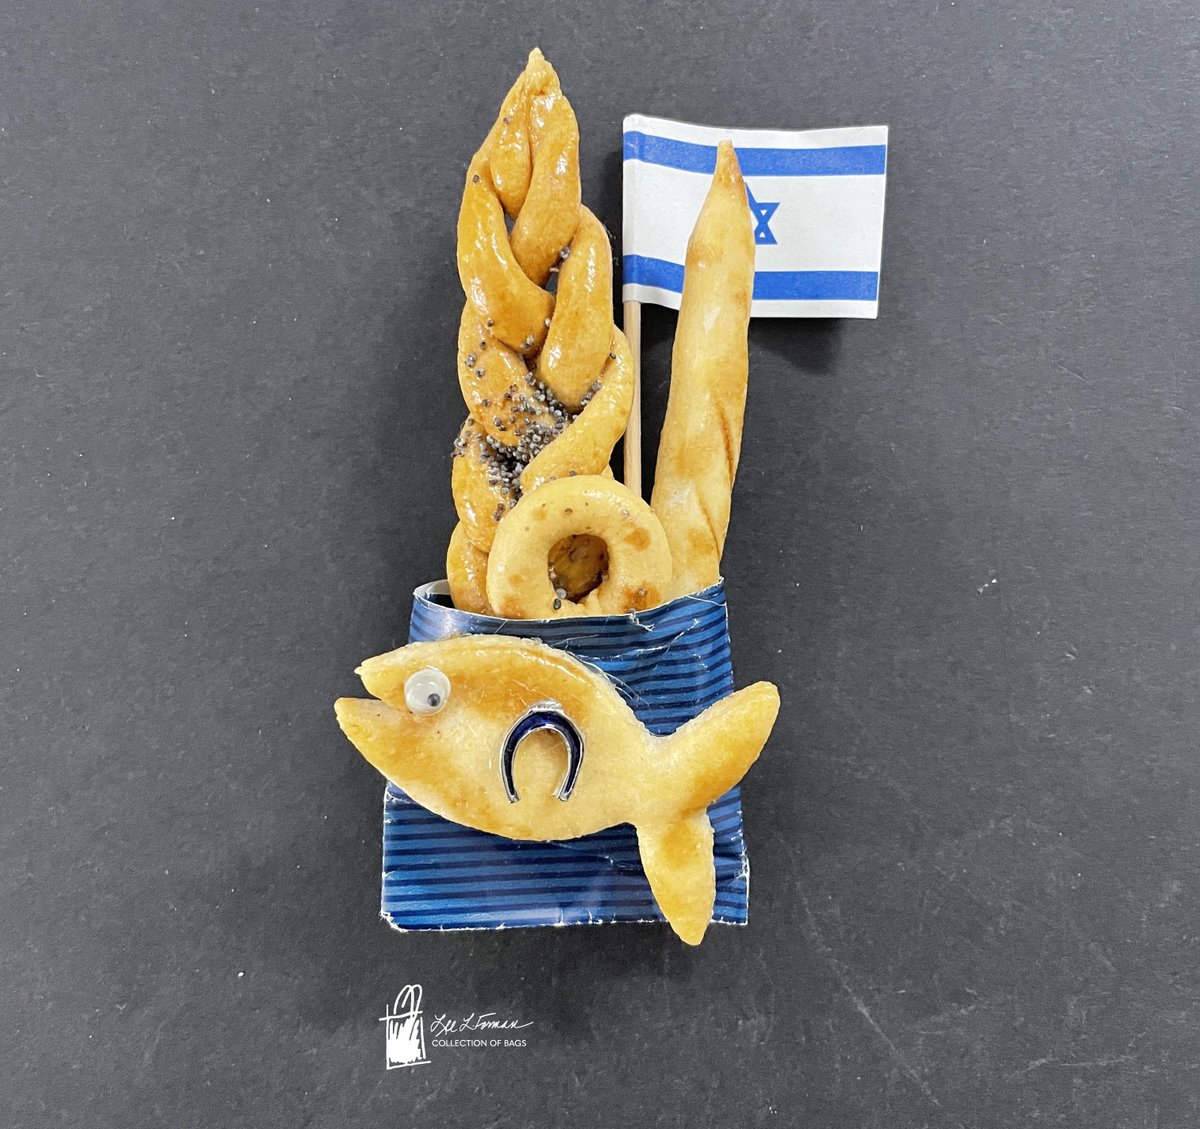 103/365: Does food ever remind you of past travels? This miniature magnet is designed to remind the viewer of delicious breads eaten during travel to Israel, including challah, bagels, and baguettes.